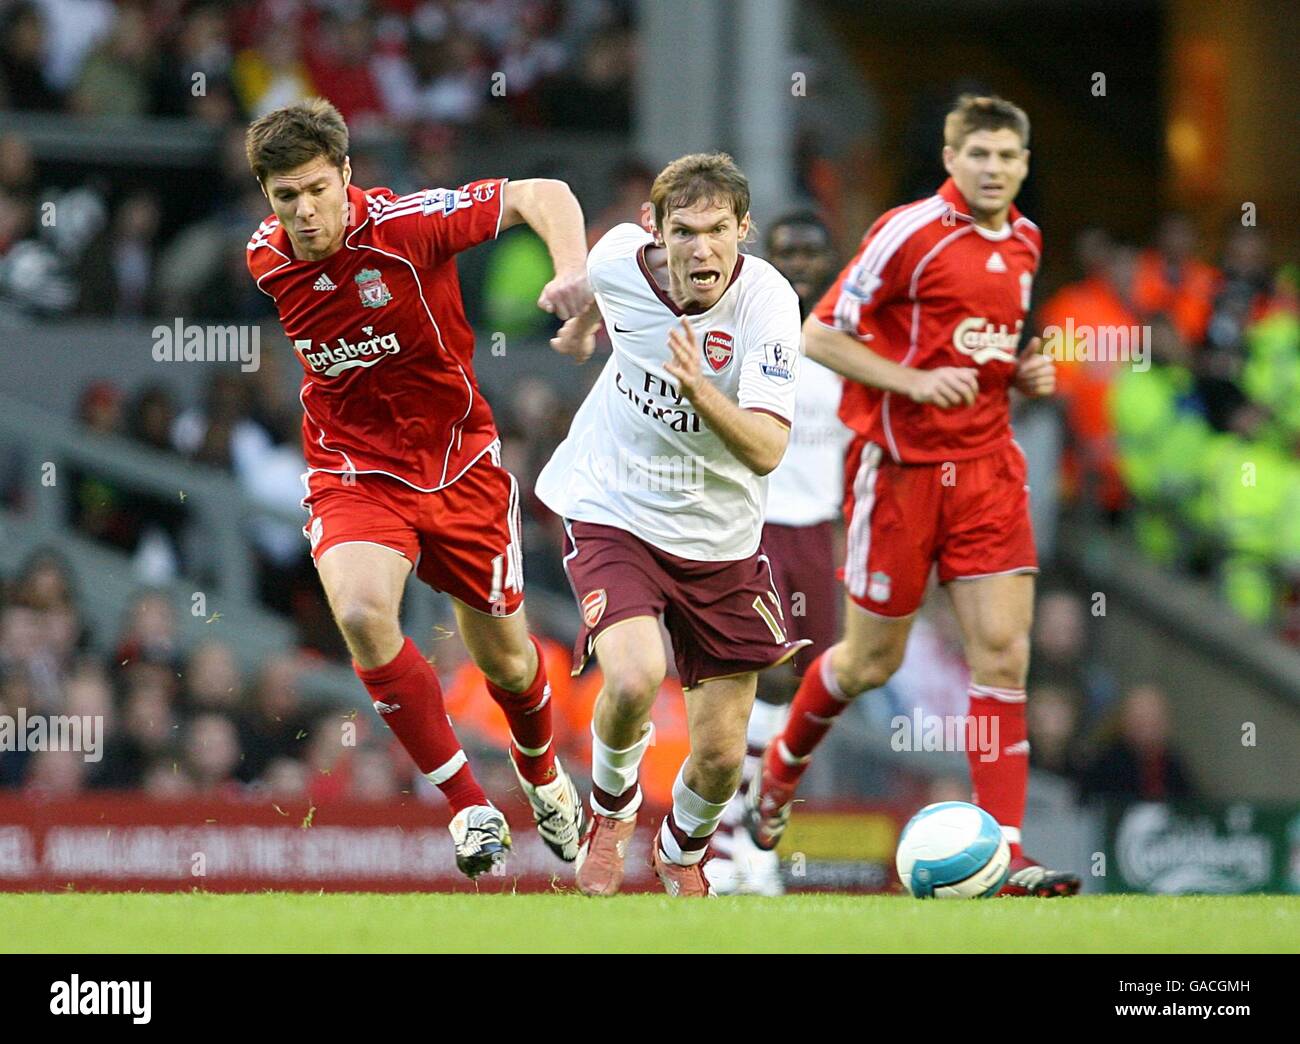 Soccer - Barclays Premier League - Liverpool v Arsenal - Anfield. Liverpool's Xabi Alonso (left) and Arsenal's Alexander Hleb battle for the ball. Stock Photo